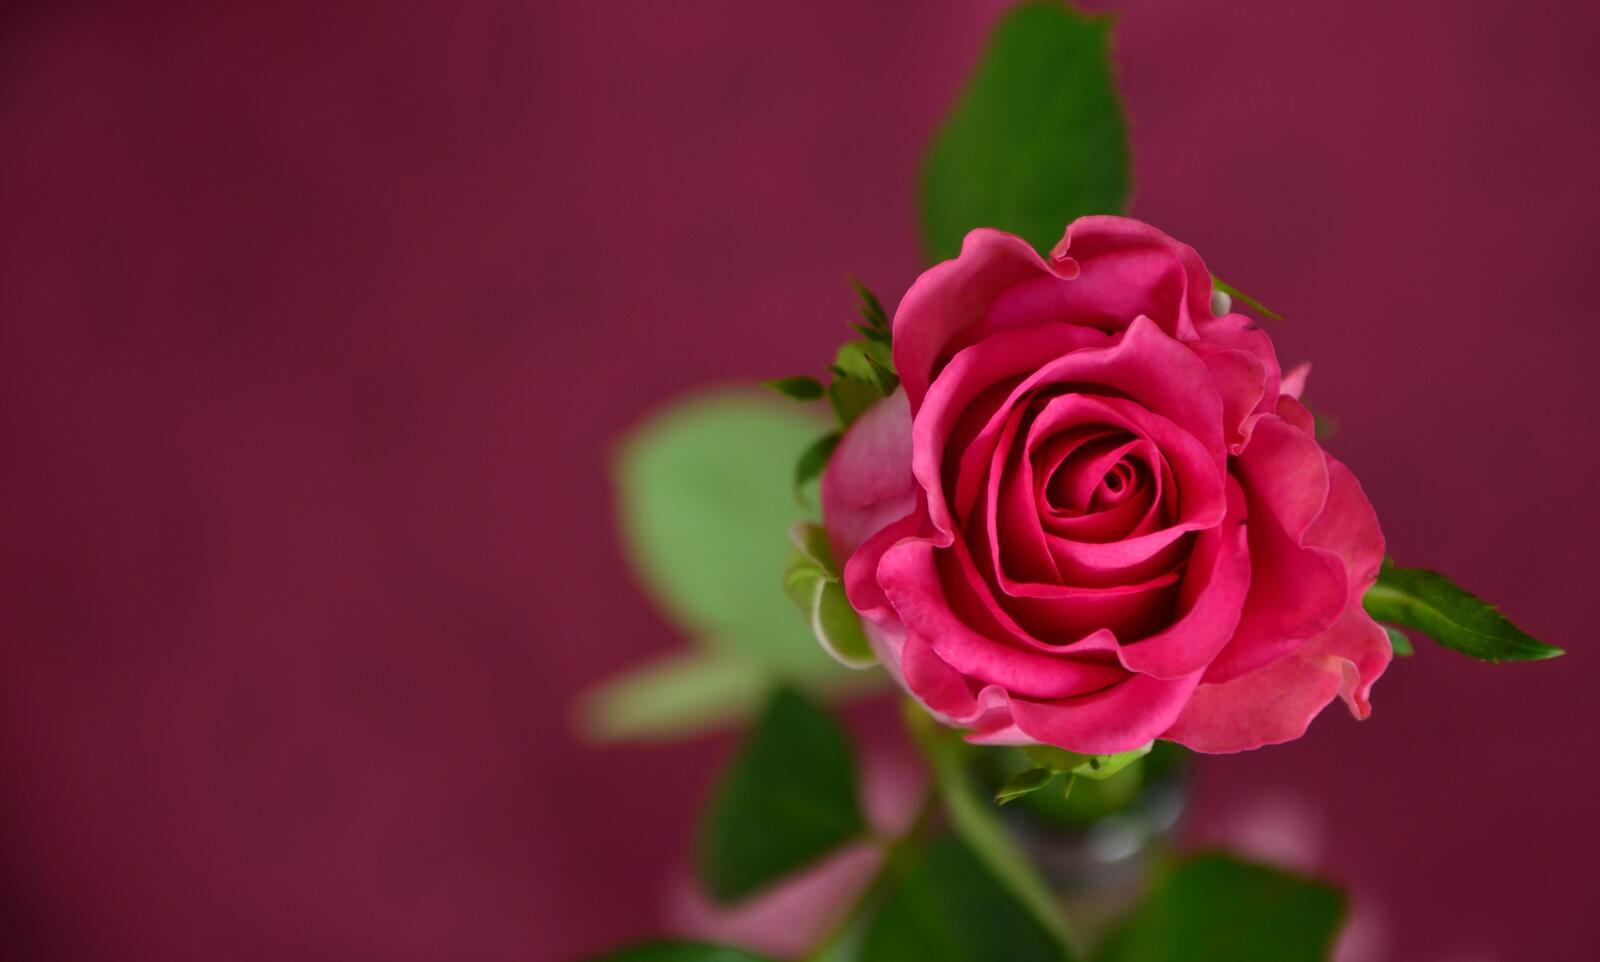 Free photo A single pink rose with green leaves